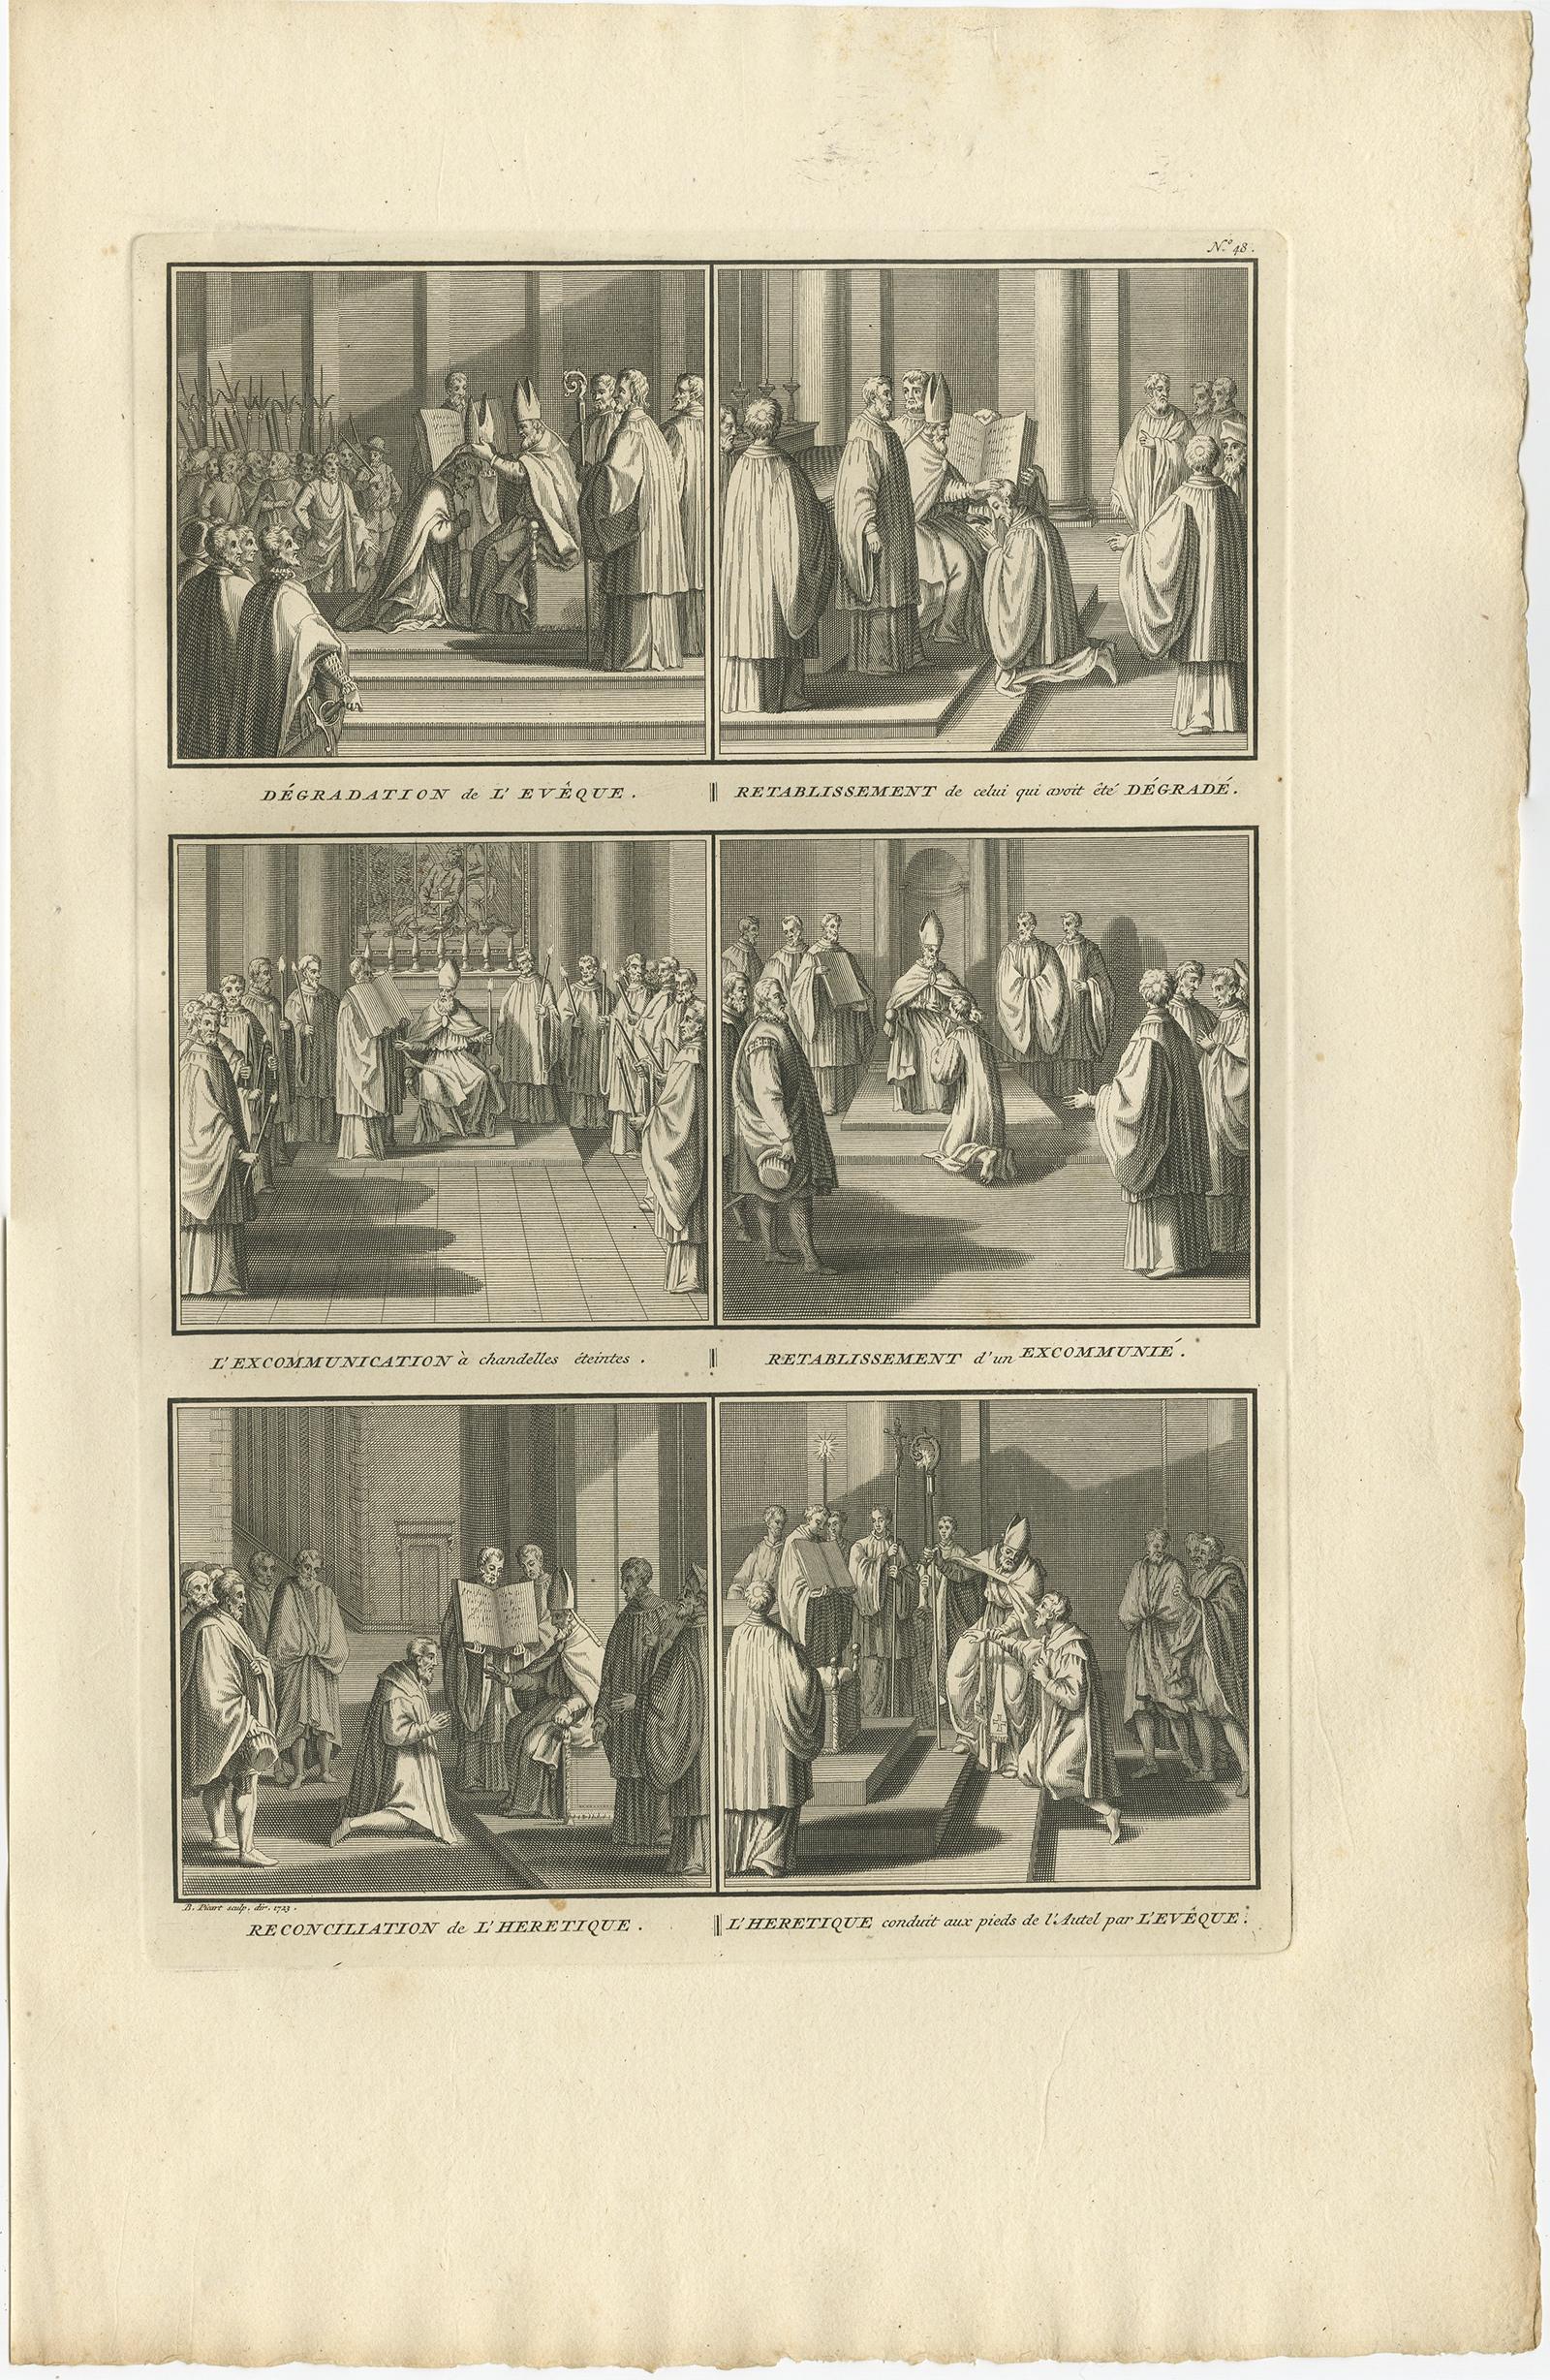 Antique religion print depicting six Roman Catholic habits, rituals and ceremonies. Degradation of a Bishop, excommunication, rehabilitation of someone who was excommunicated, reconciliation of a heretic etc. Originates from 'Ceremonies et coutumes